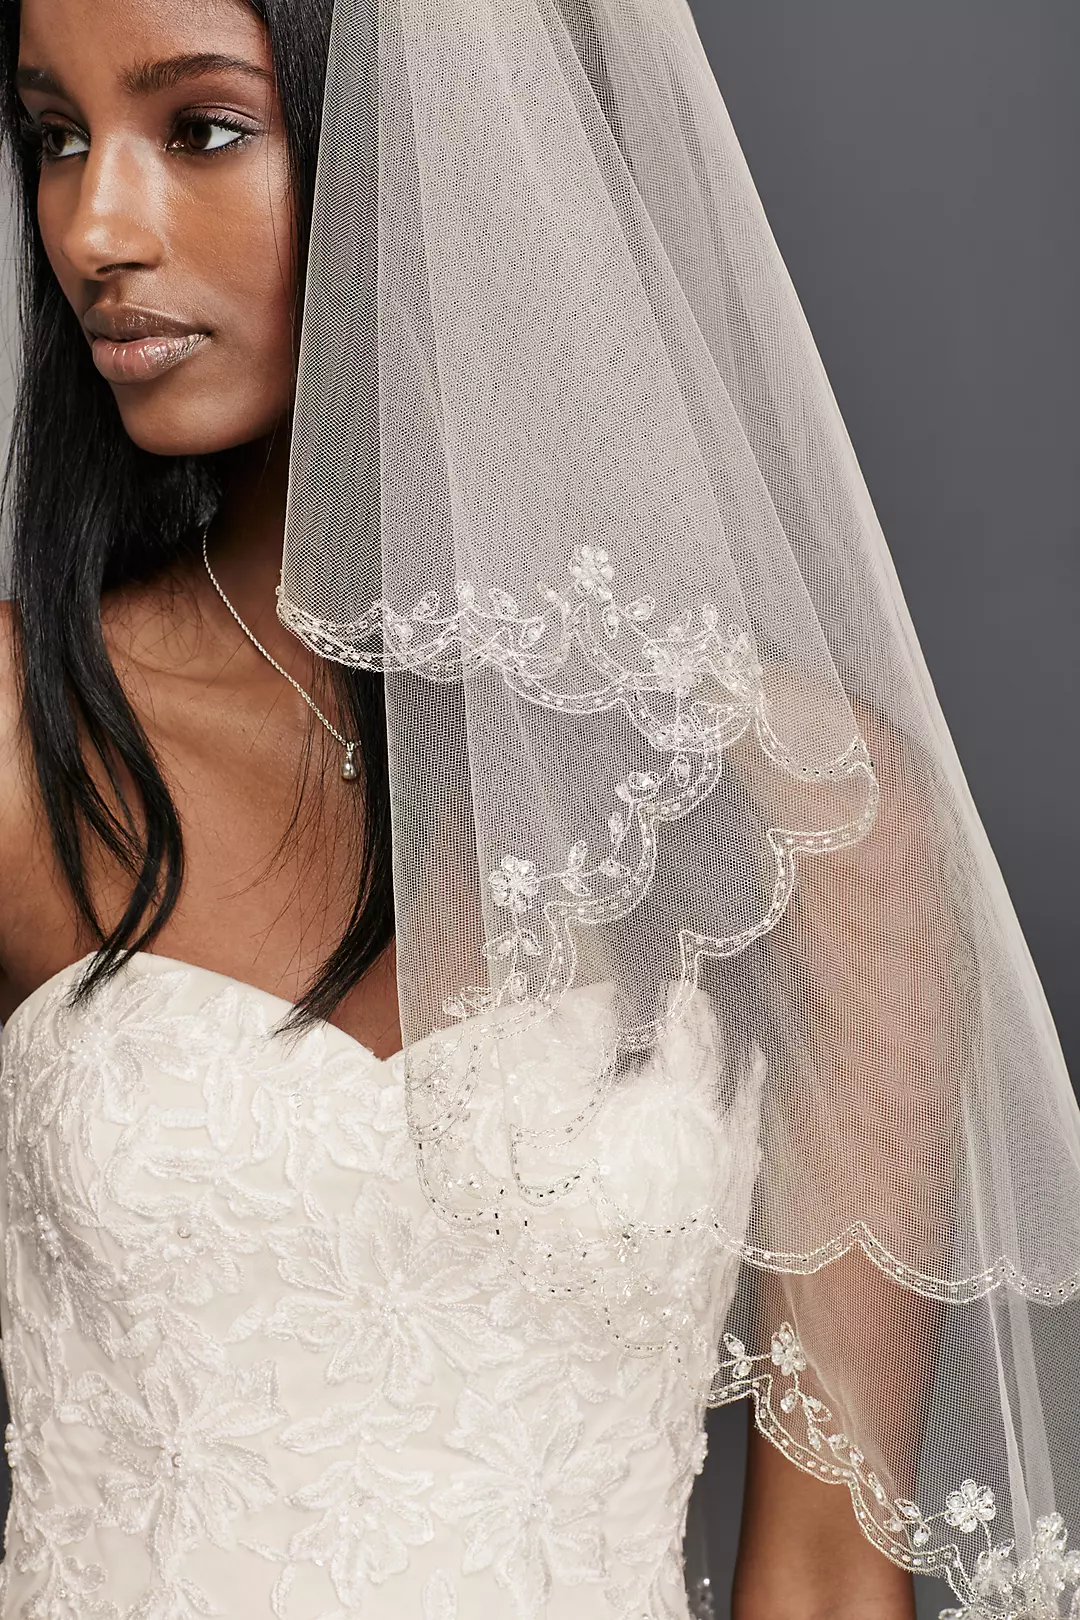 Fingertip Length Two-Tier Veil with Scallop Edge Image 2